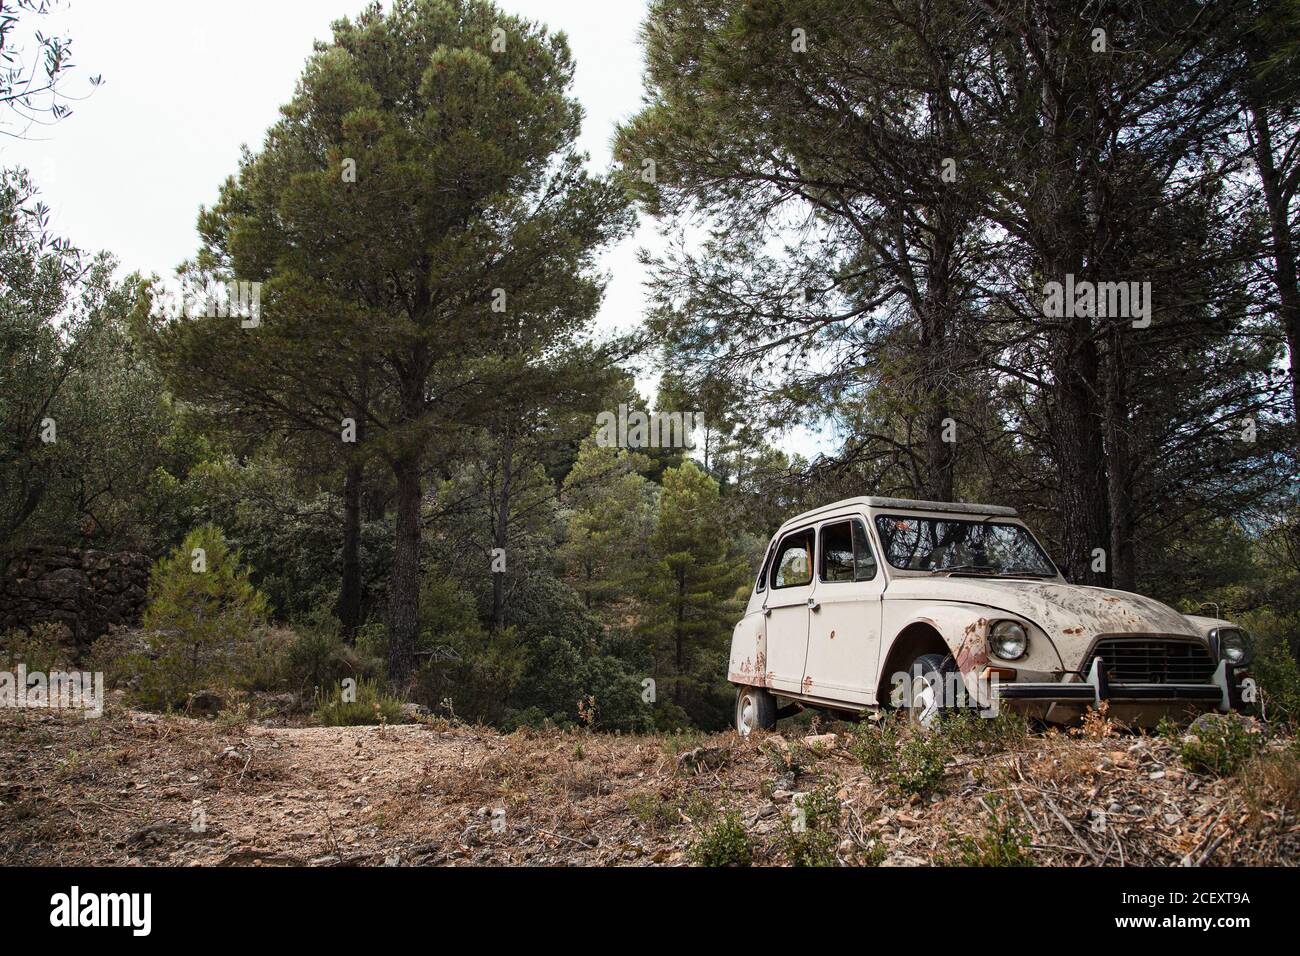 White rusty old fashioned car with broken windows located in green forest Stock Photo